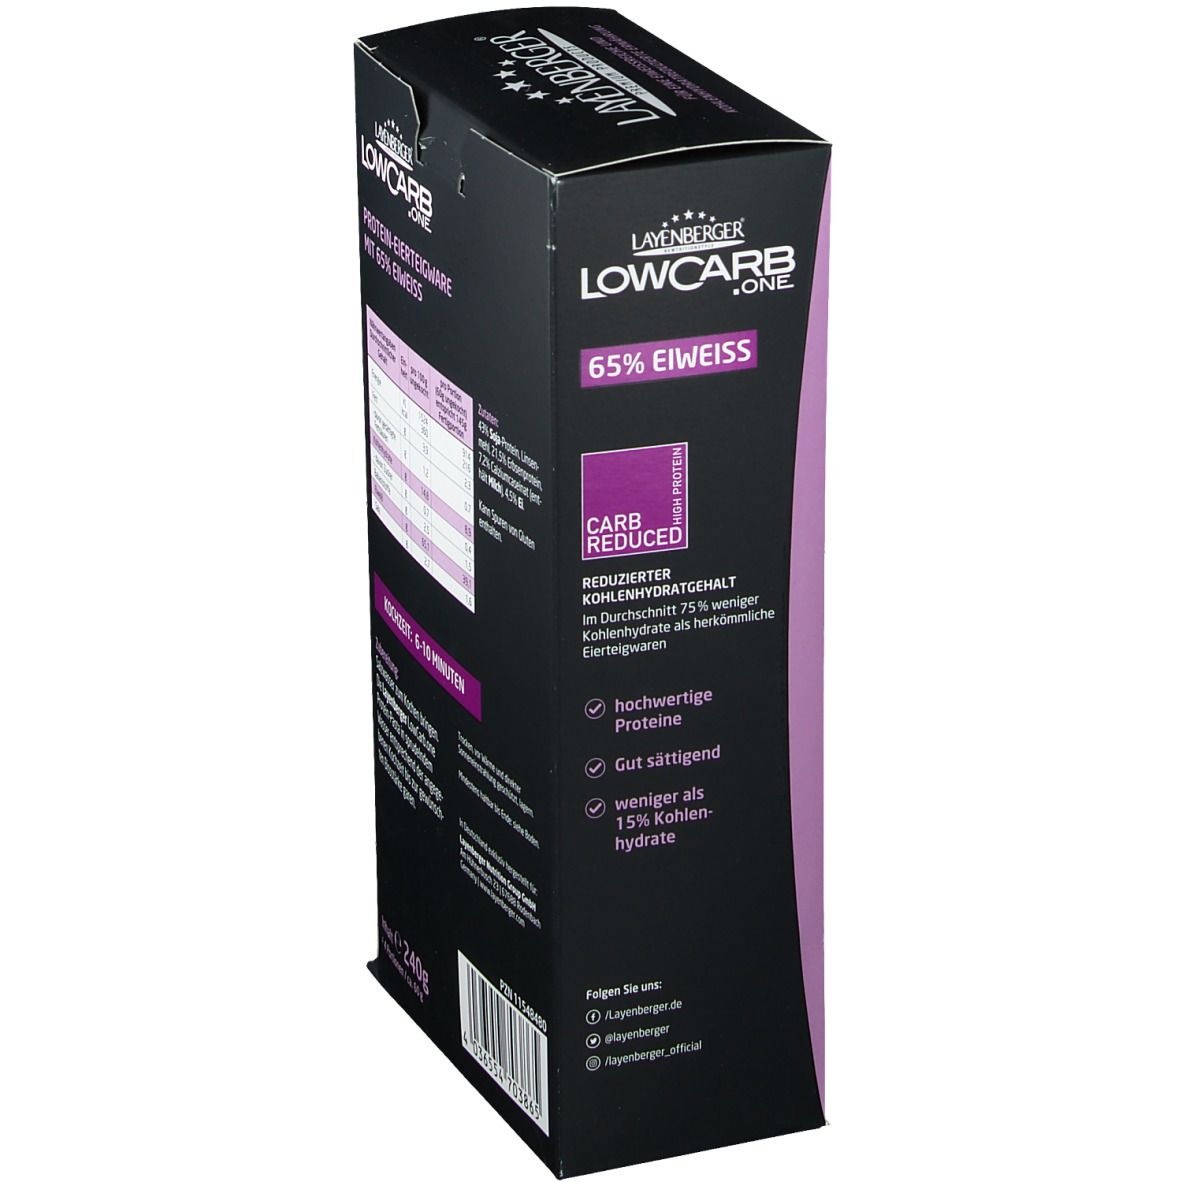 LAYENBERGER® LowCarb.one Protein Pasta Tagliatelle